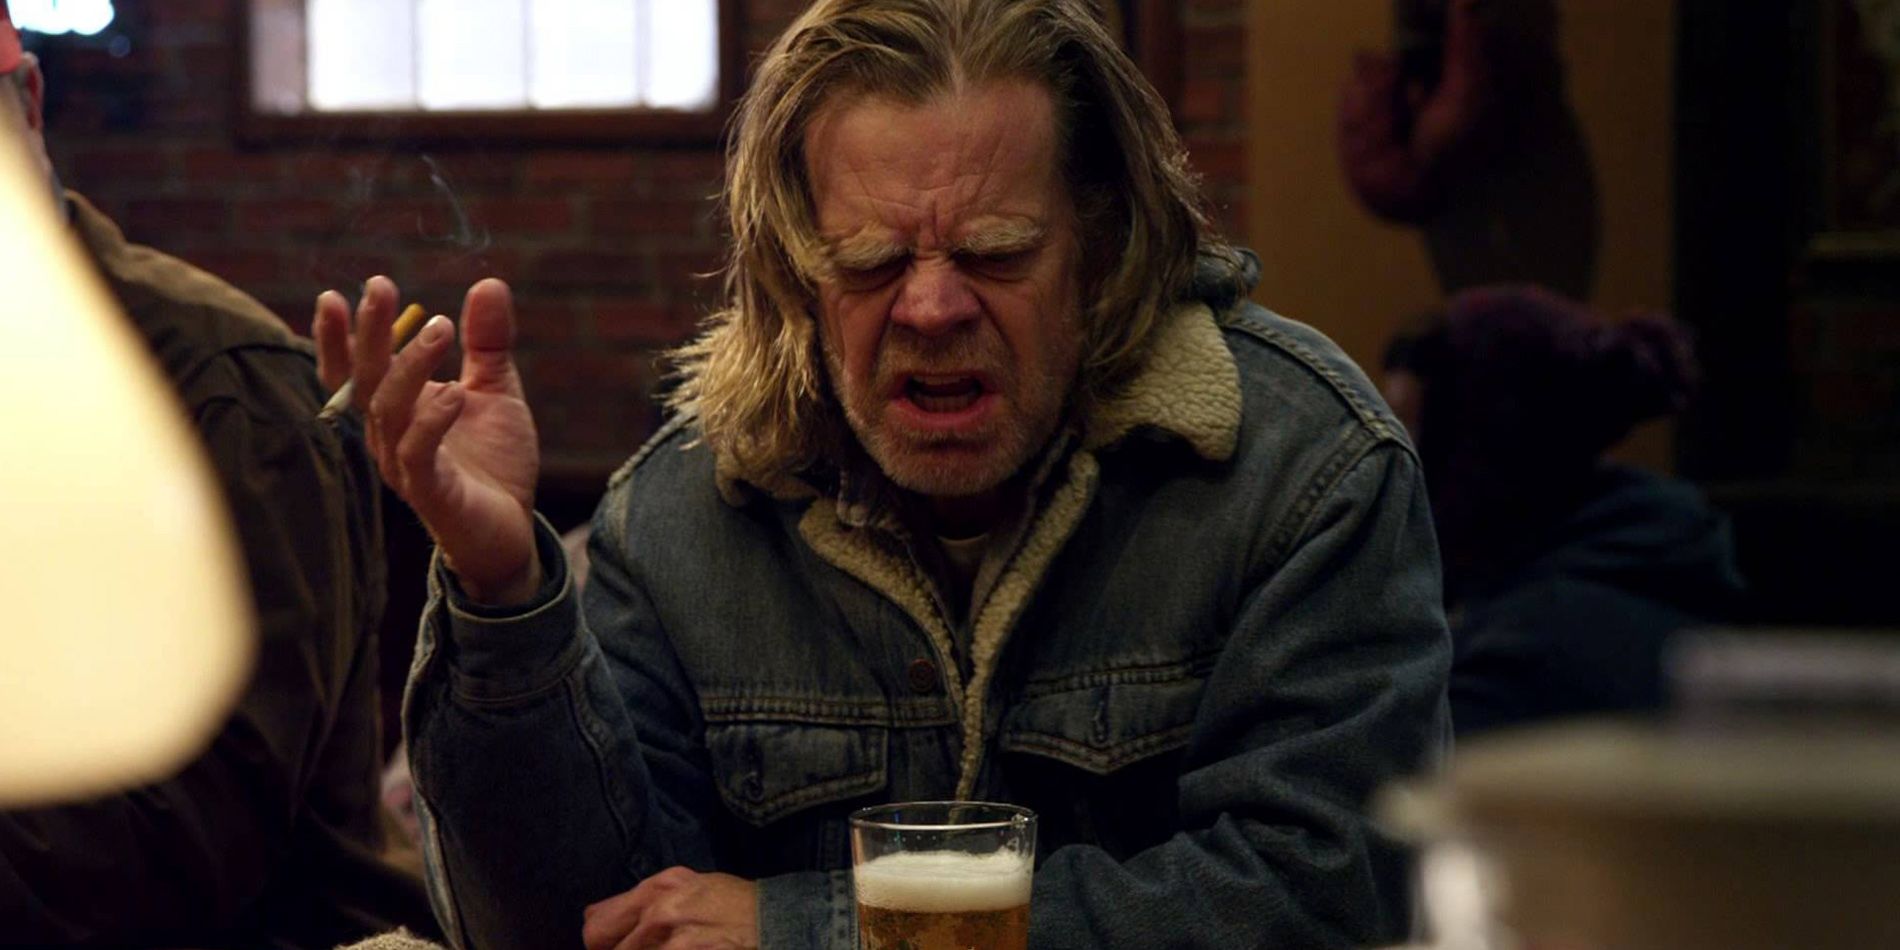 Frank Gallagher smoking and drinking at the bar in Shameless